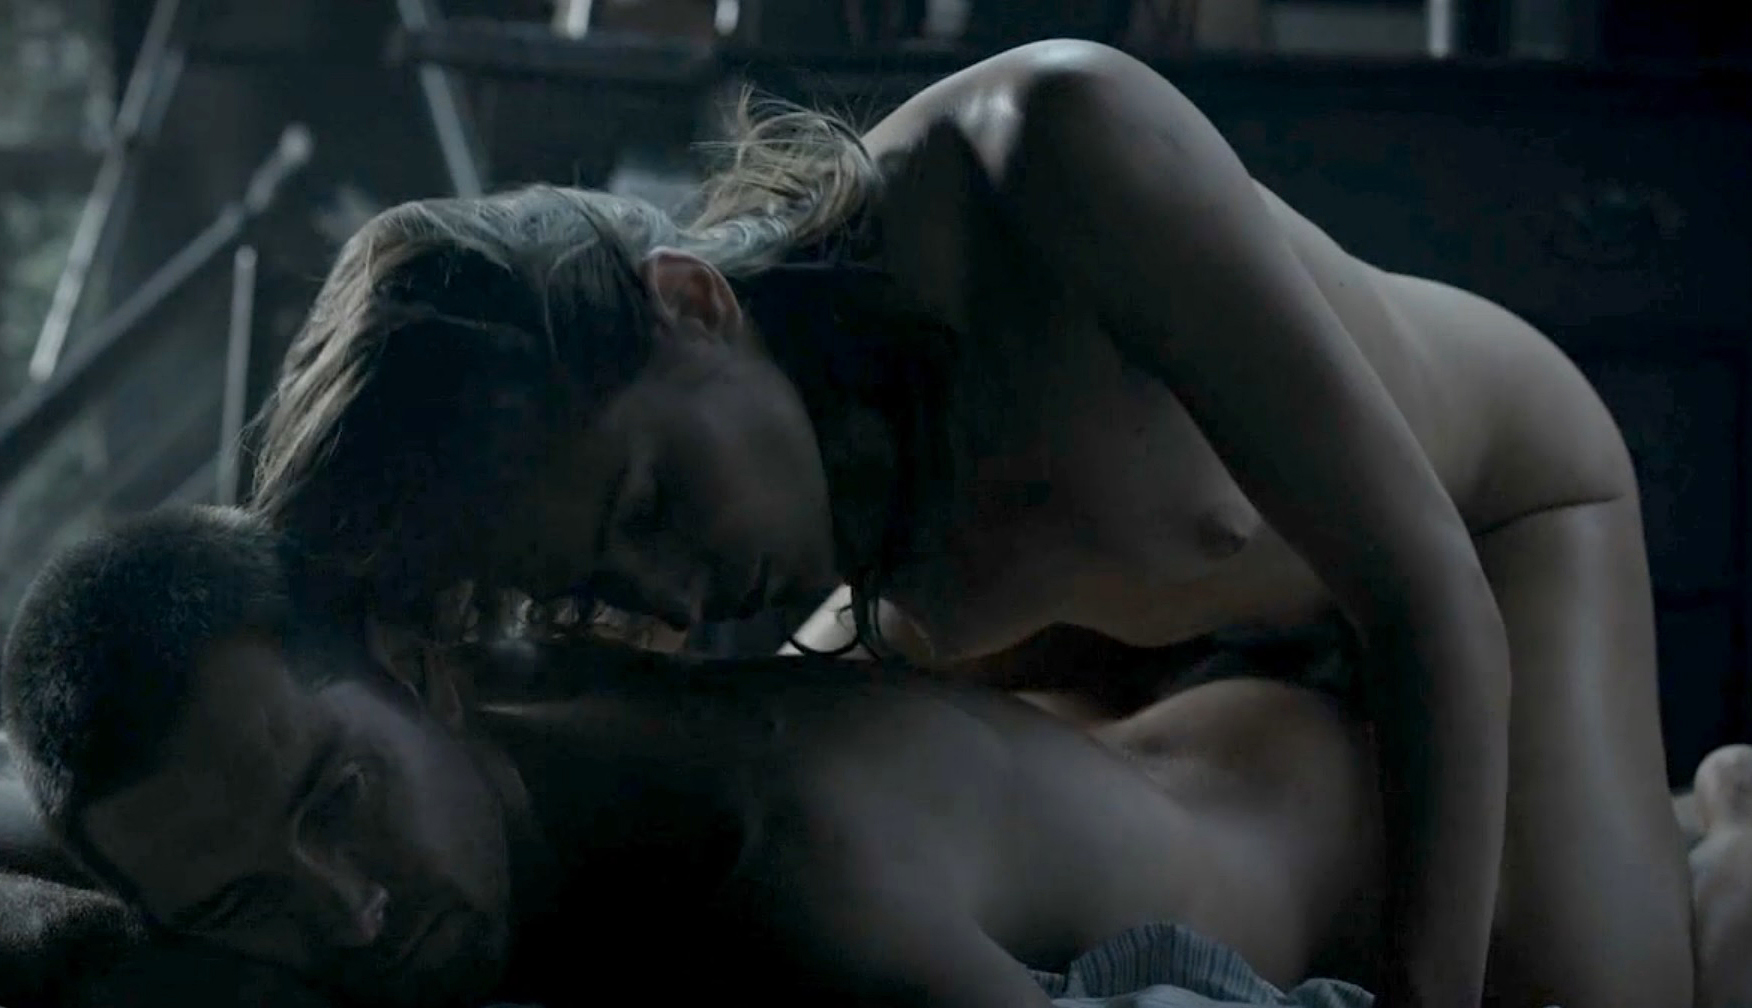 Ivana Milicevic Intensive Sex From Banshee Series.